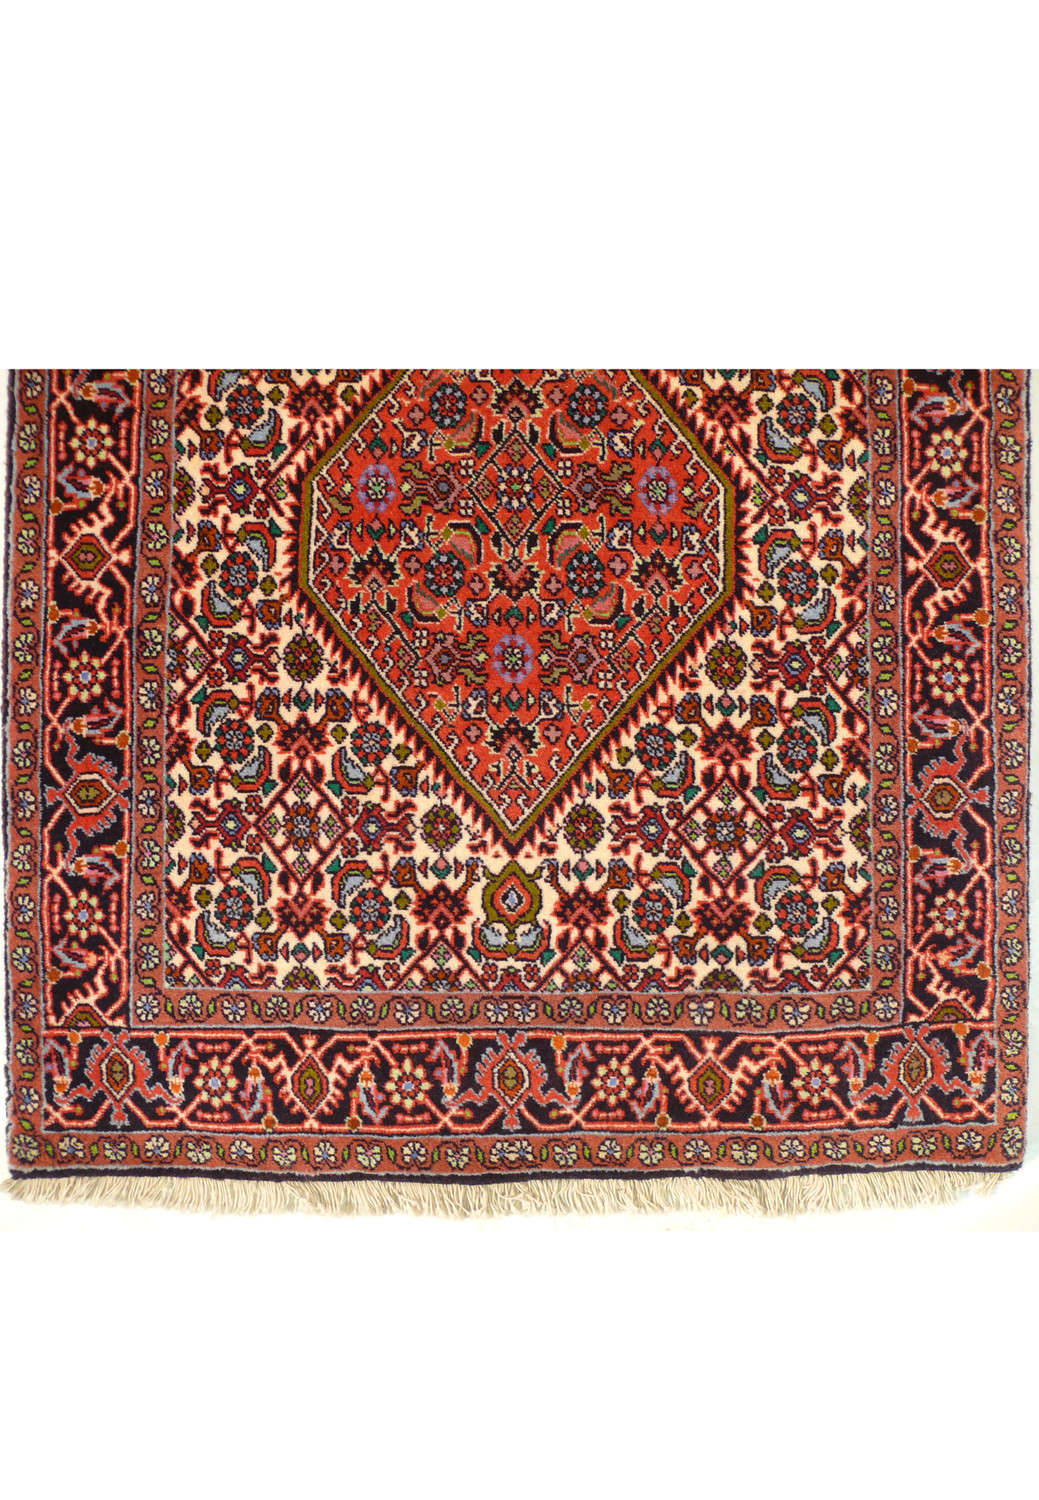 Detailed close-up of the central design of a Persian Bijar Runner Rug, featuring symmetric medallions and a complex interplay of colors